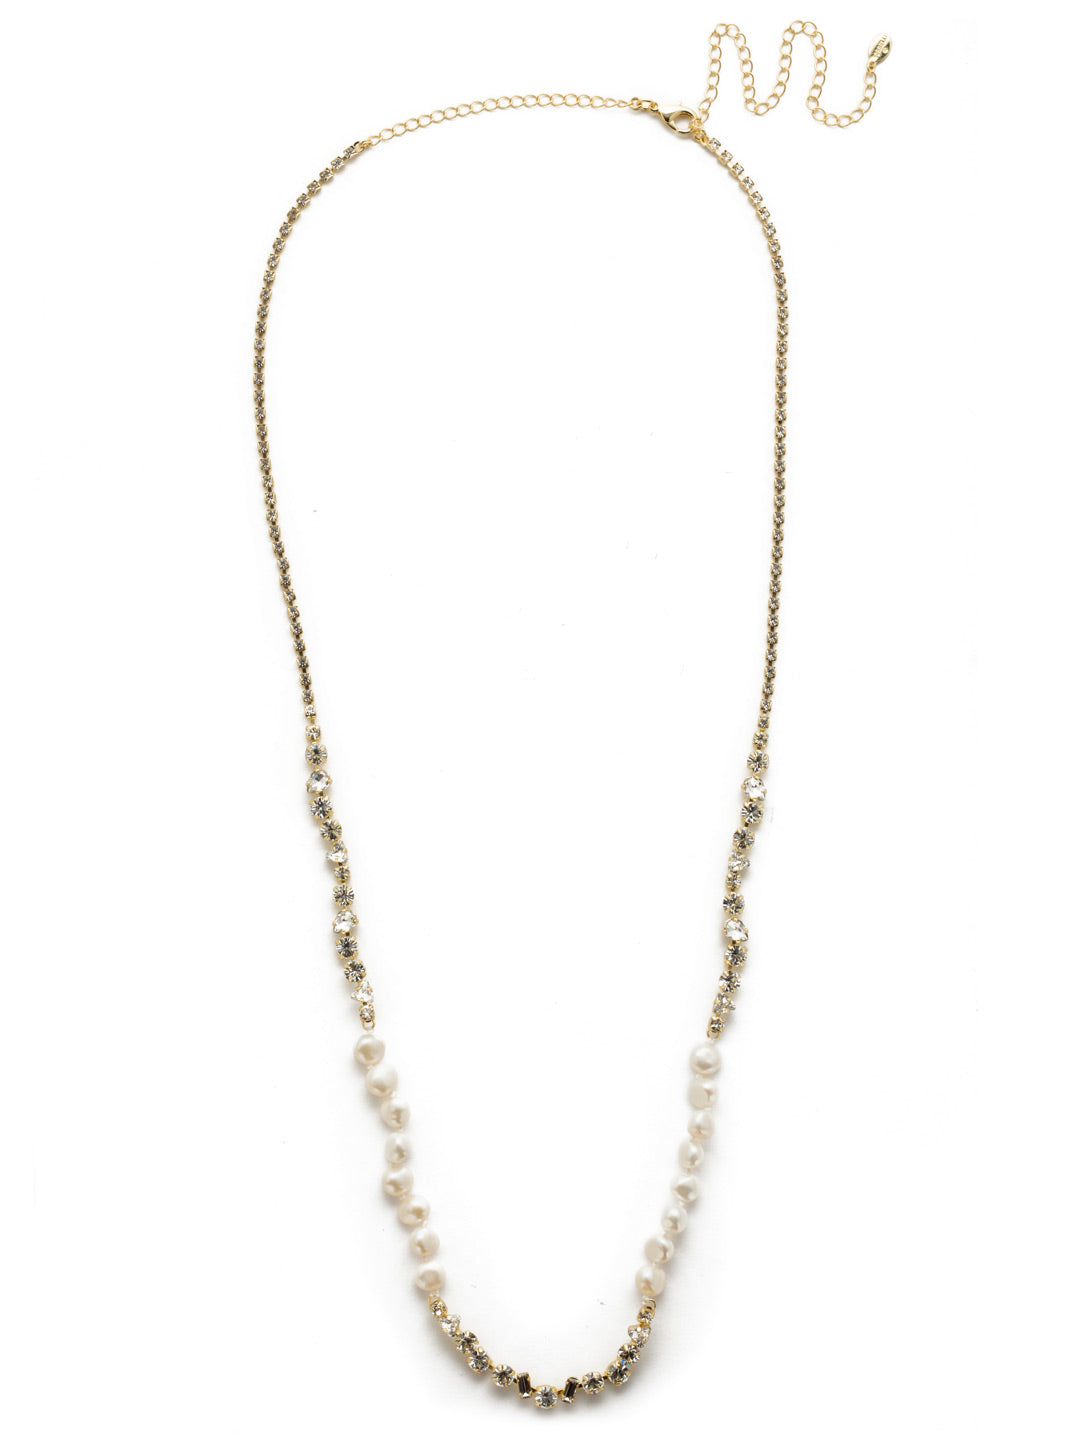 NEK18 Long Necklace - NEK18BGMDP - <p>Delicate layered necklace with elegant pearls and crystals will create an eye-catching look. From Sorrelli's Modern Pearl collection in our Bright Gold-tone finish.</p>